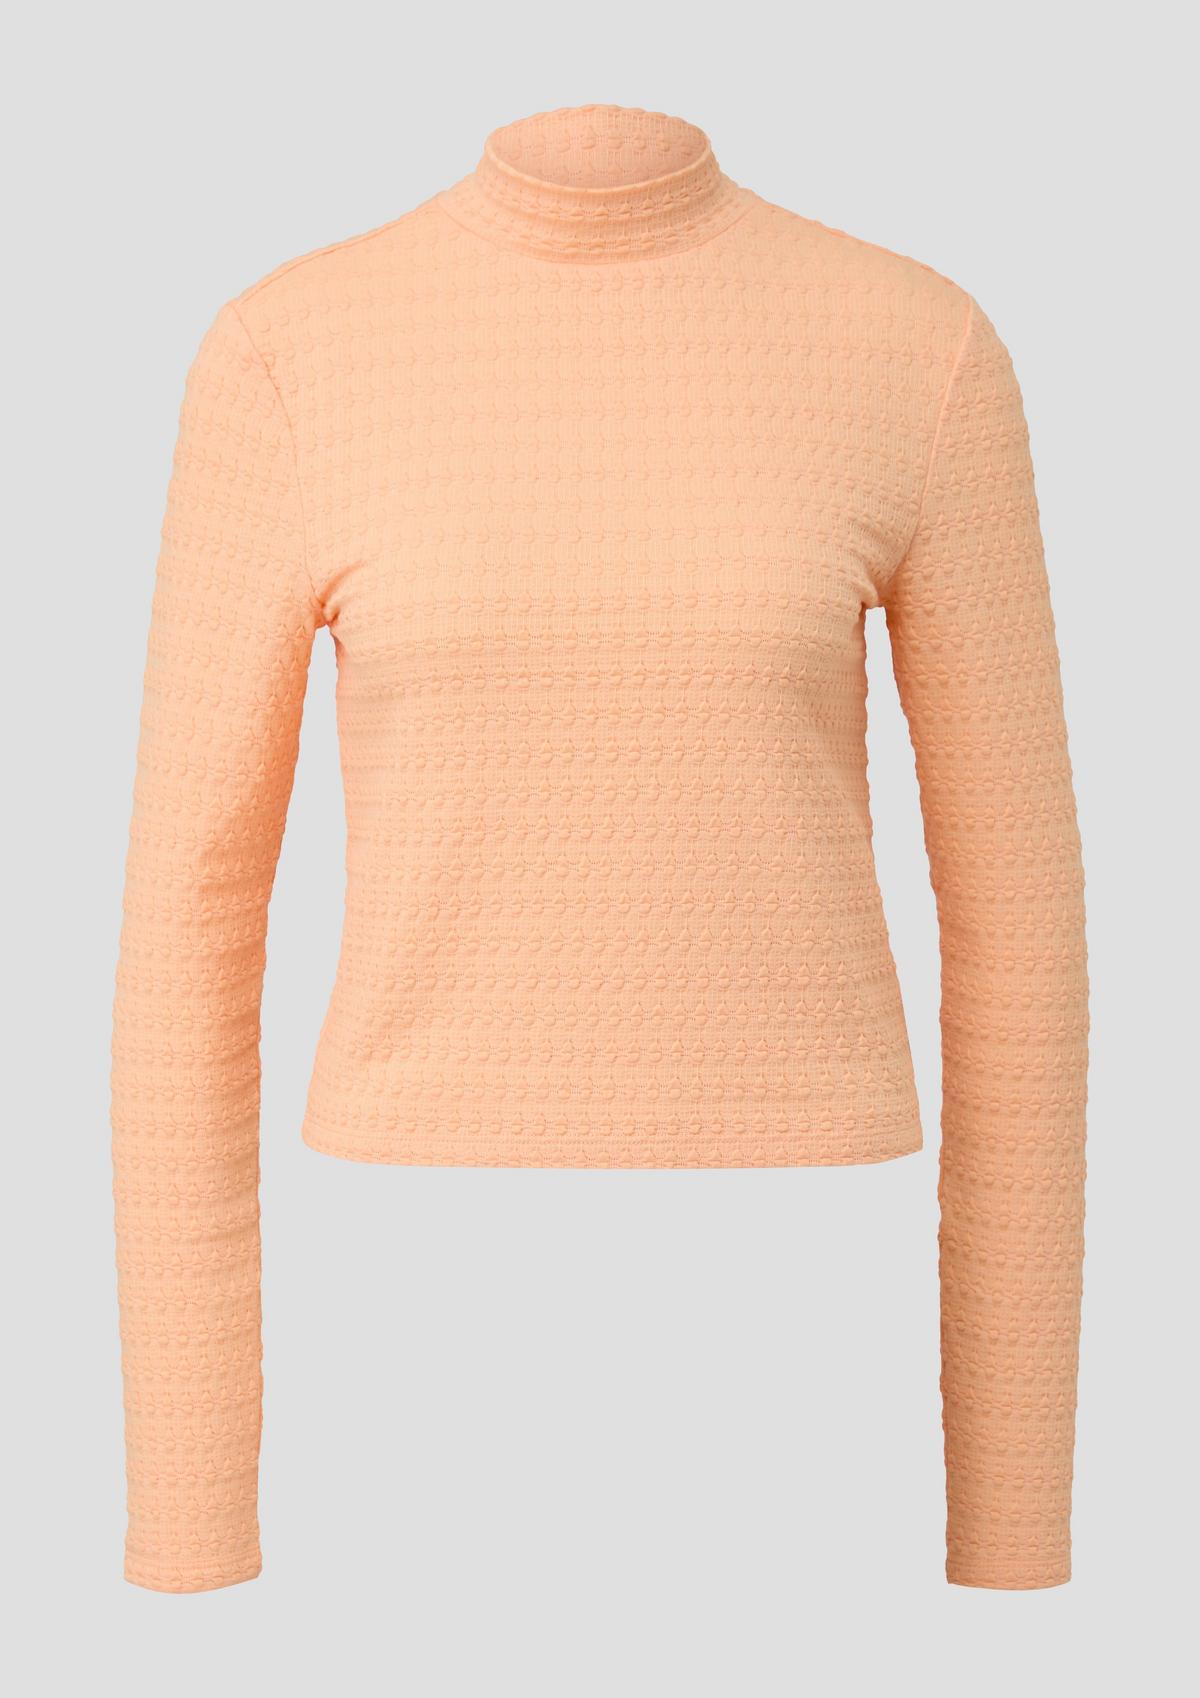 s.Oliver Long sleeve jacquard top